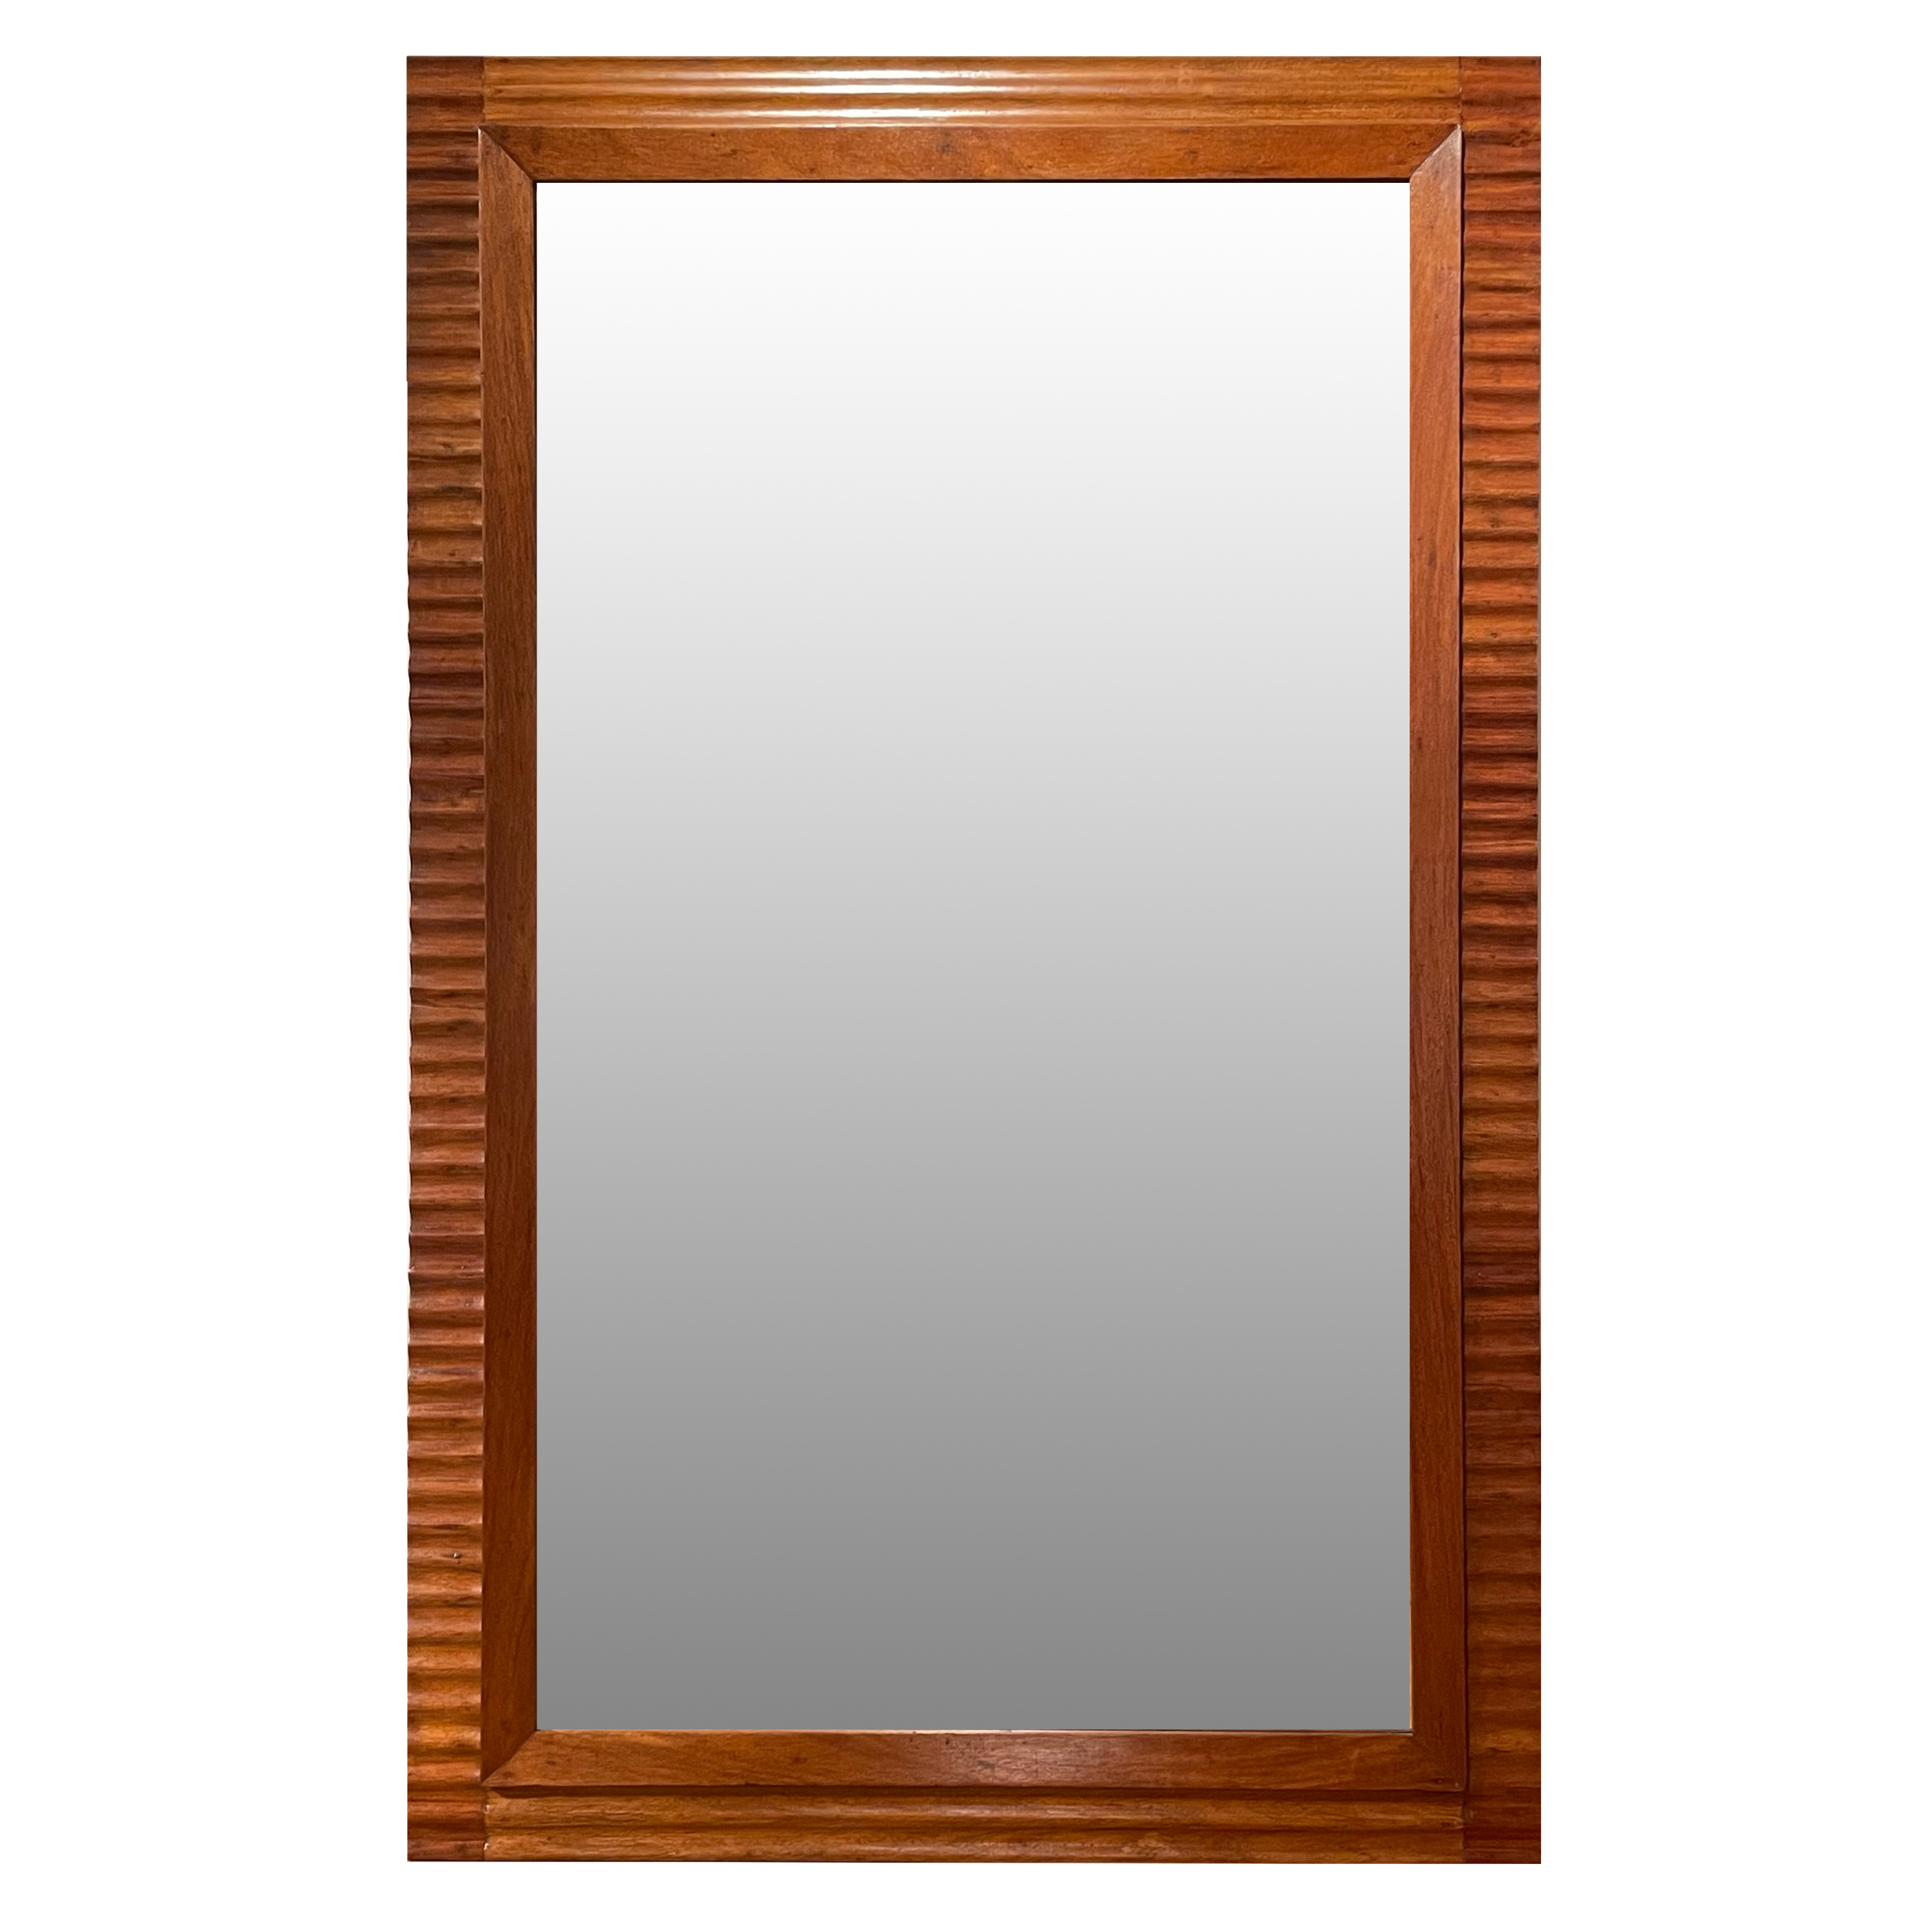 - A large double frame mirror with fluting